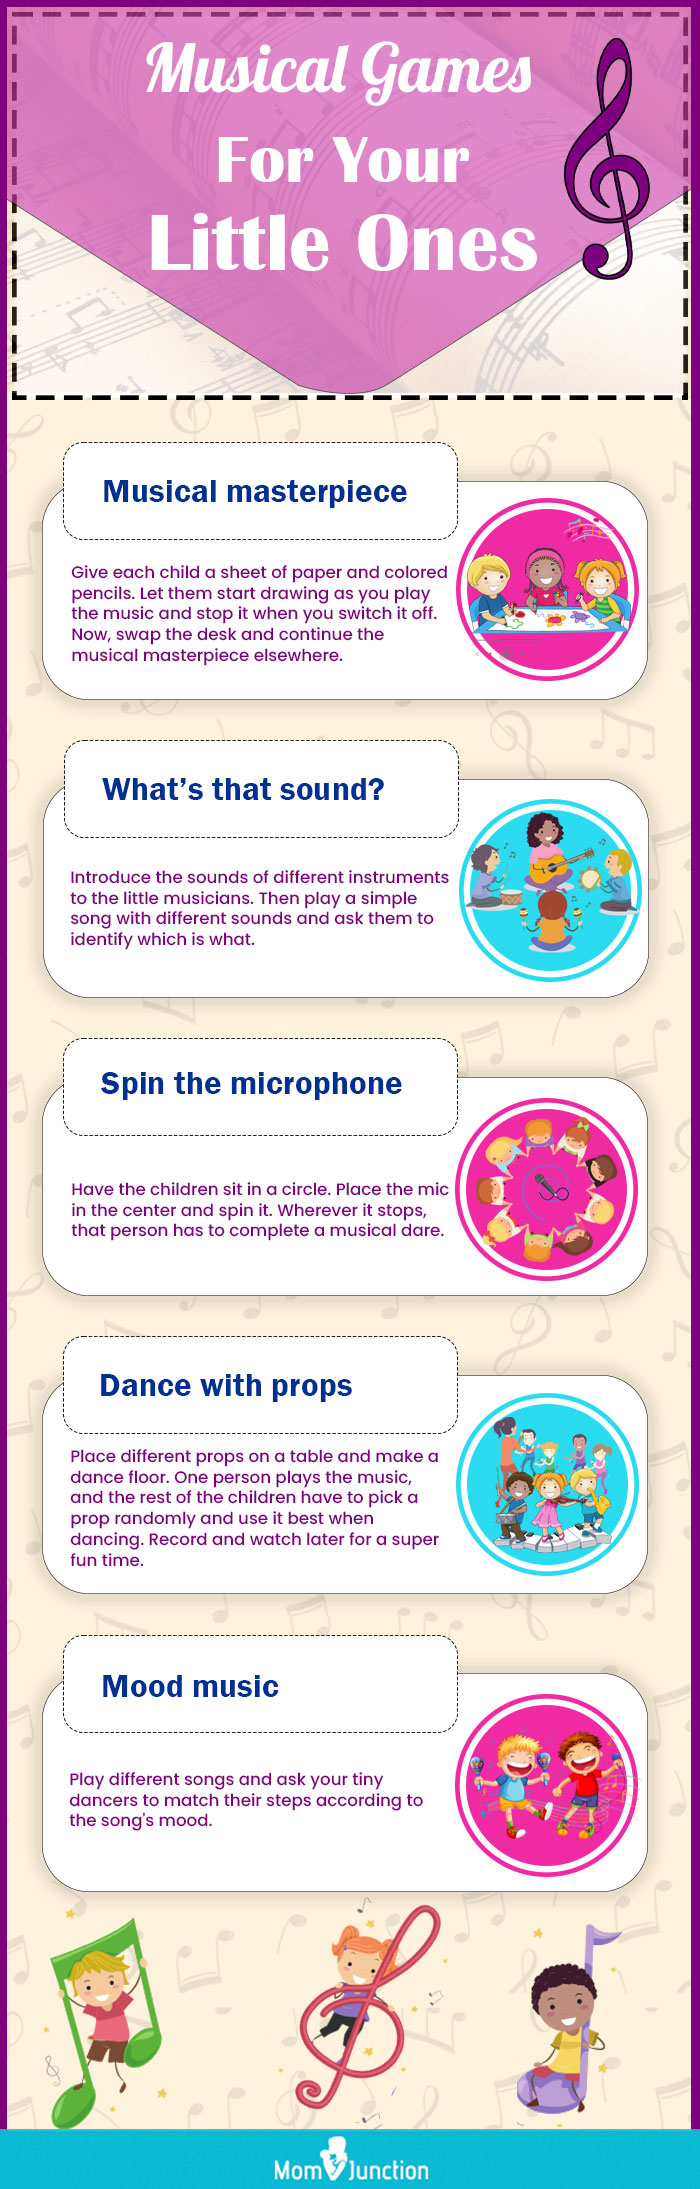 Kids Microphone with Stand Karaoke Song Music Instrument Toys  Brain-Training Educational Toy Birthday Gift for Girl Boy